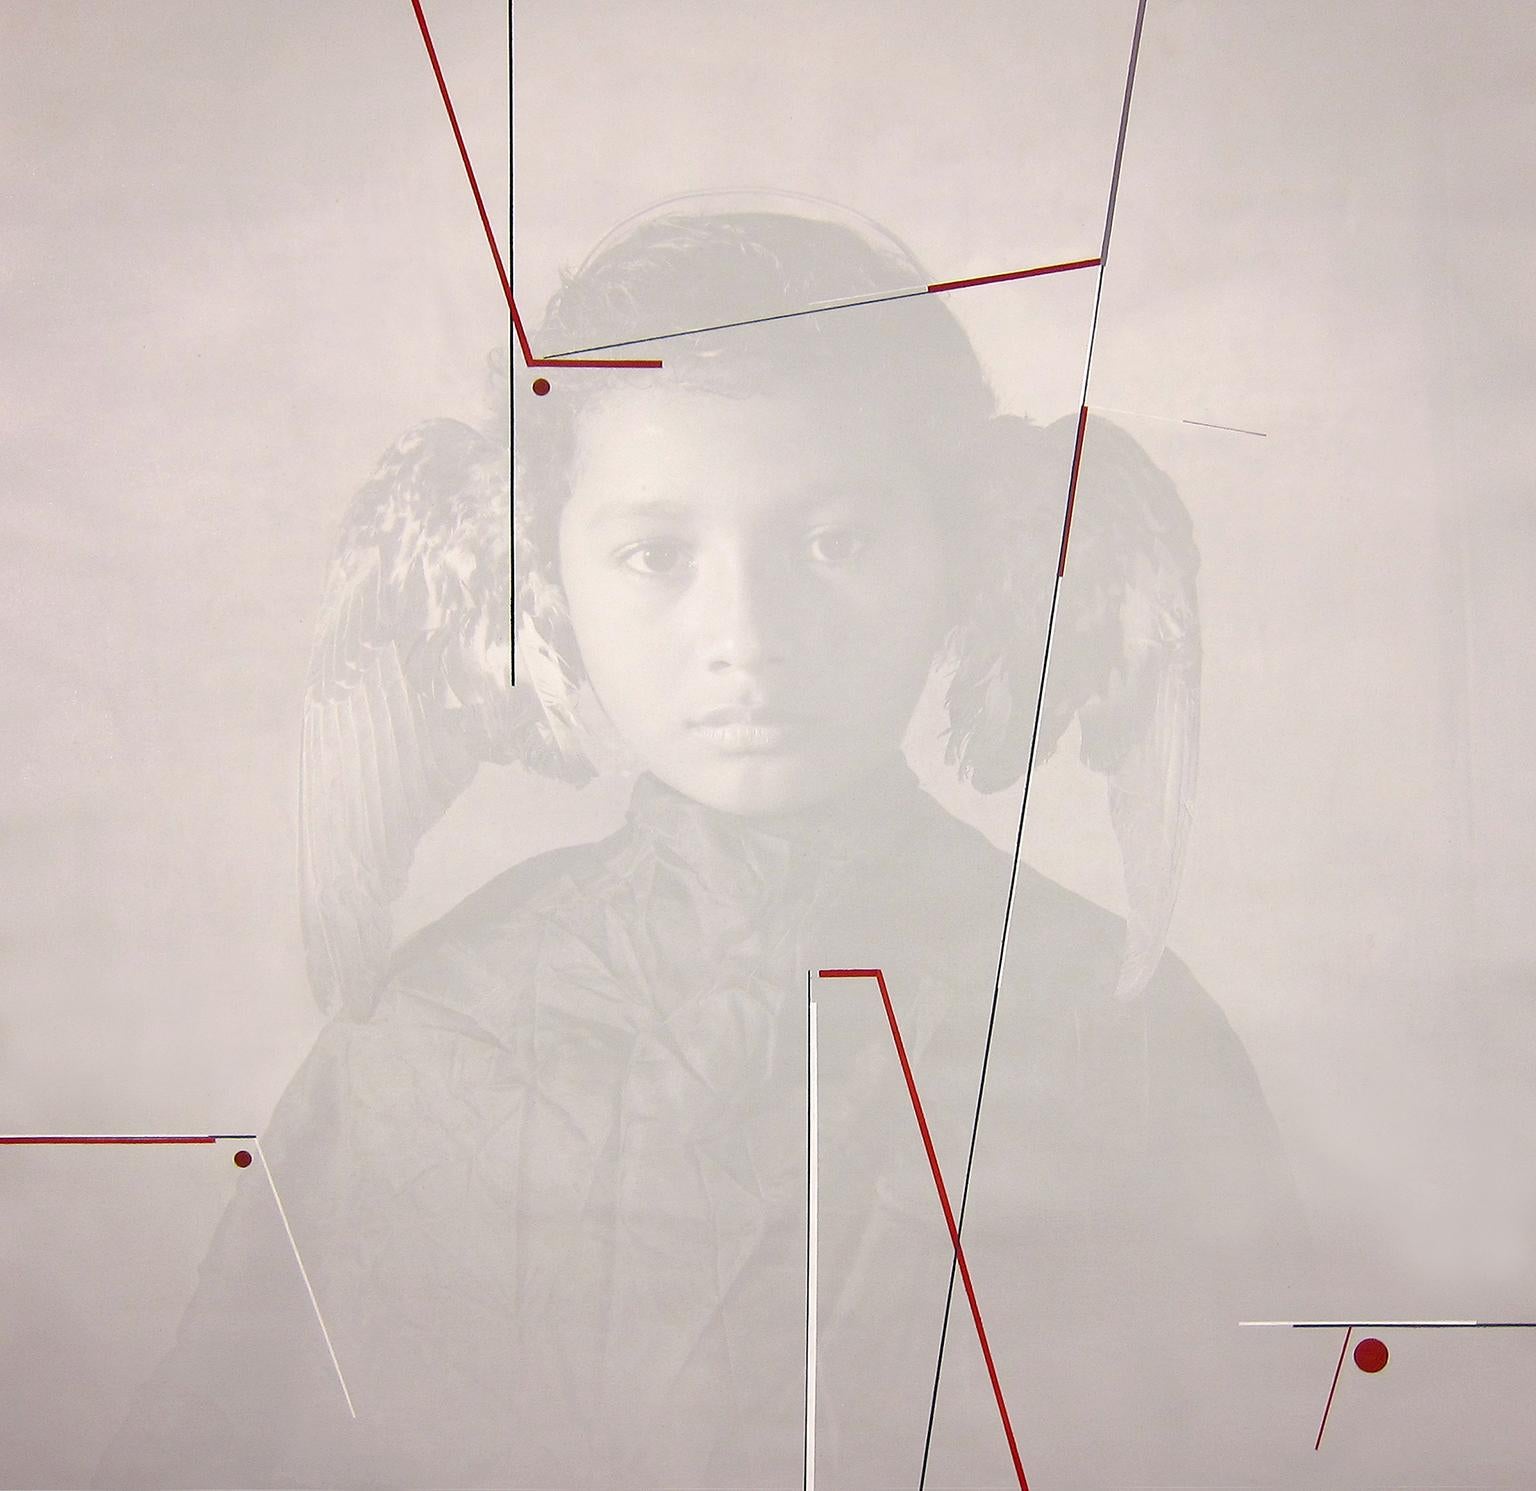 "Mobius - Joven Alado", gray portrait boy with wings photograph acrylic paint